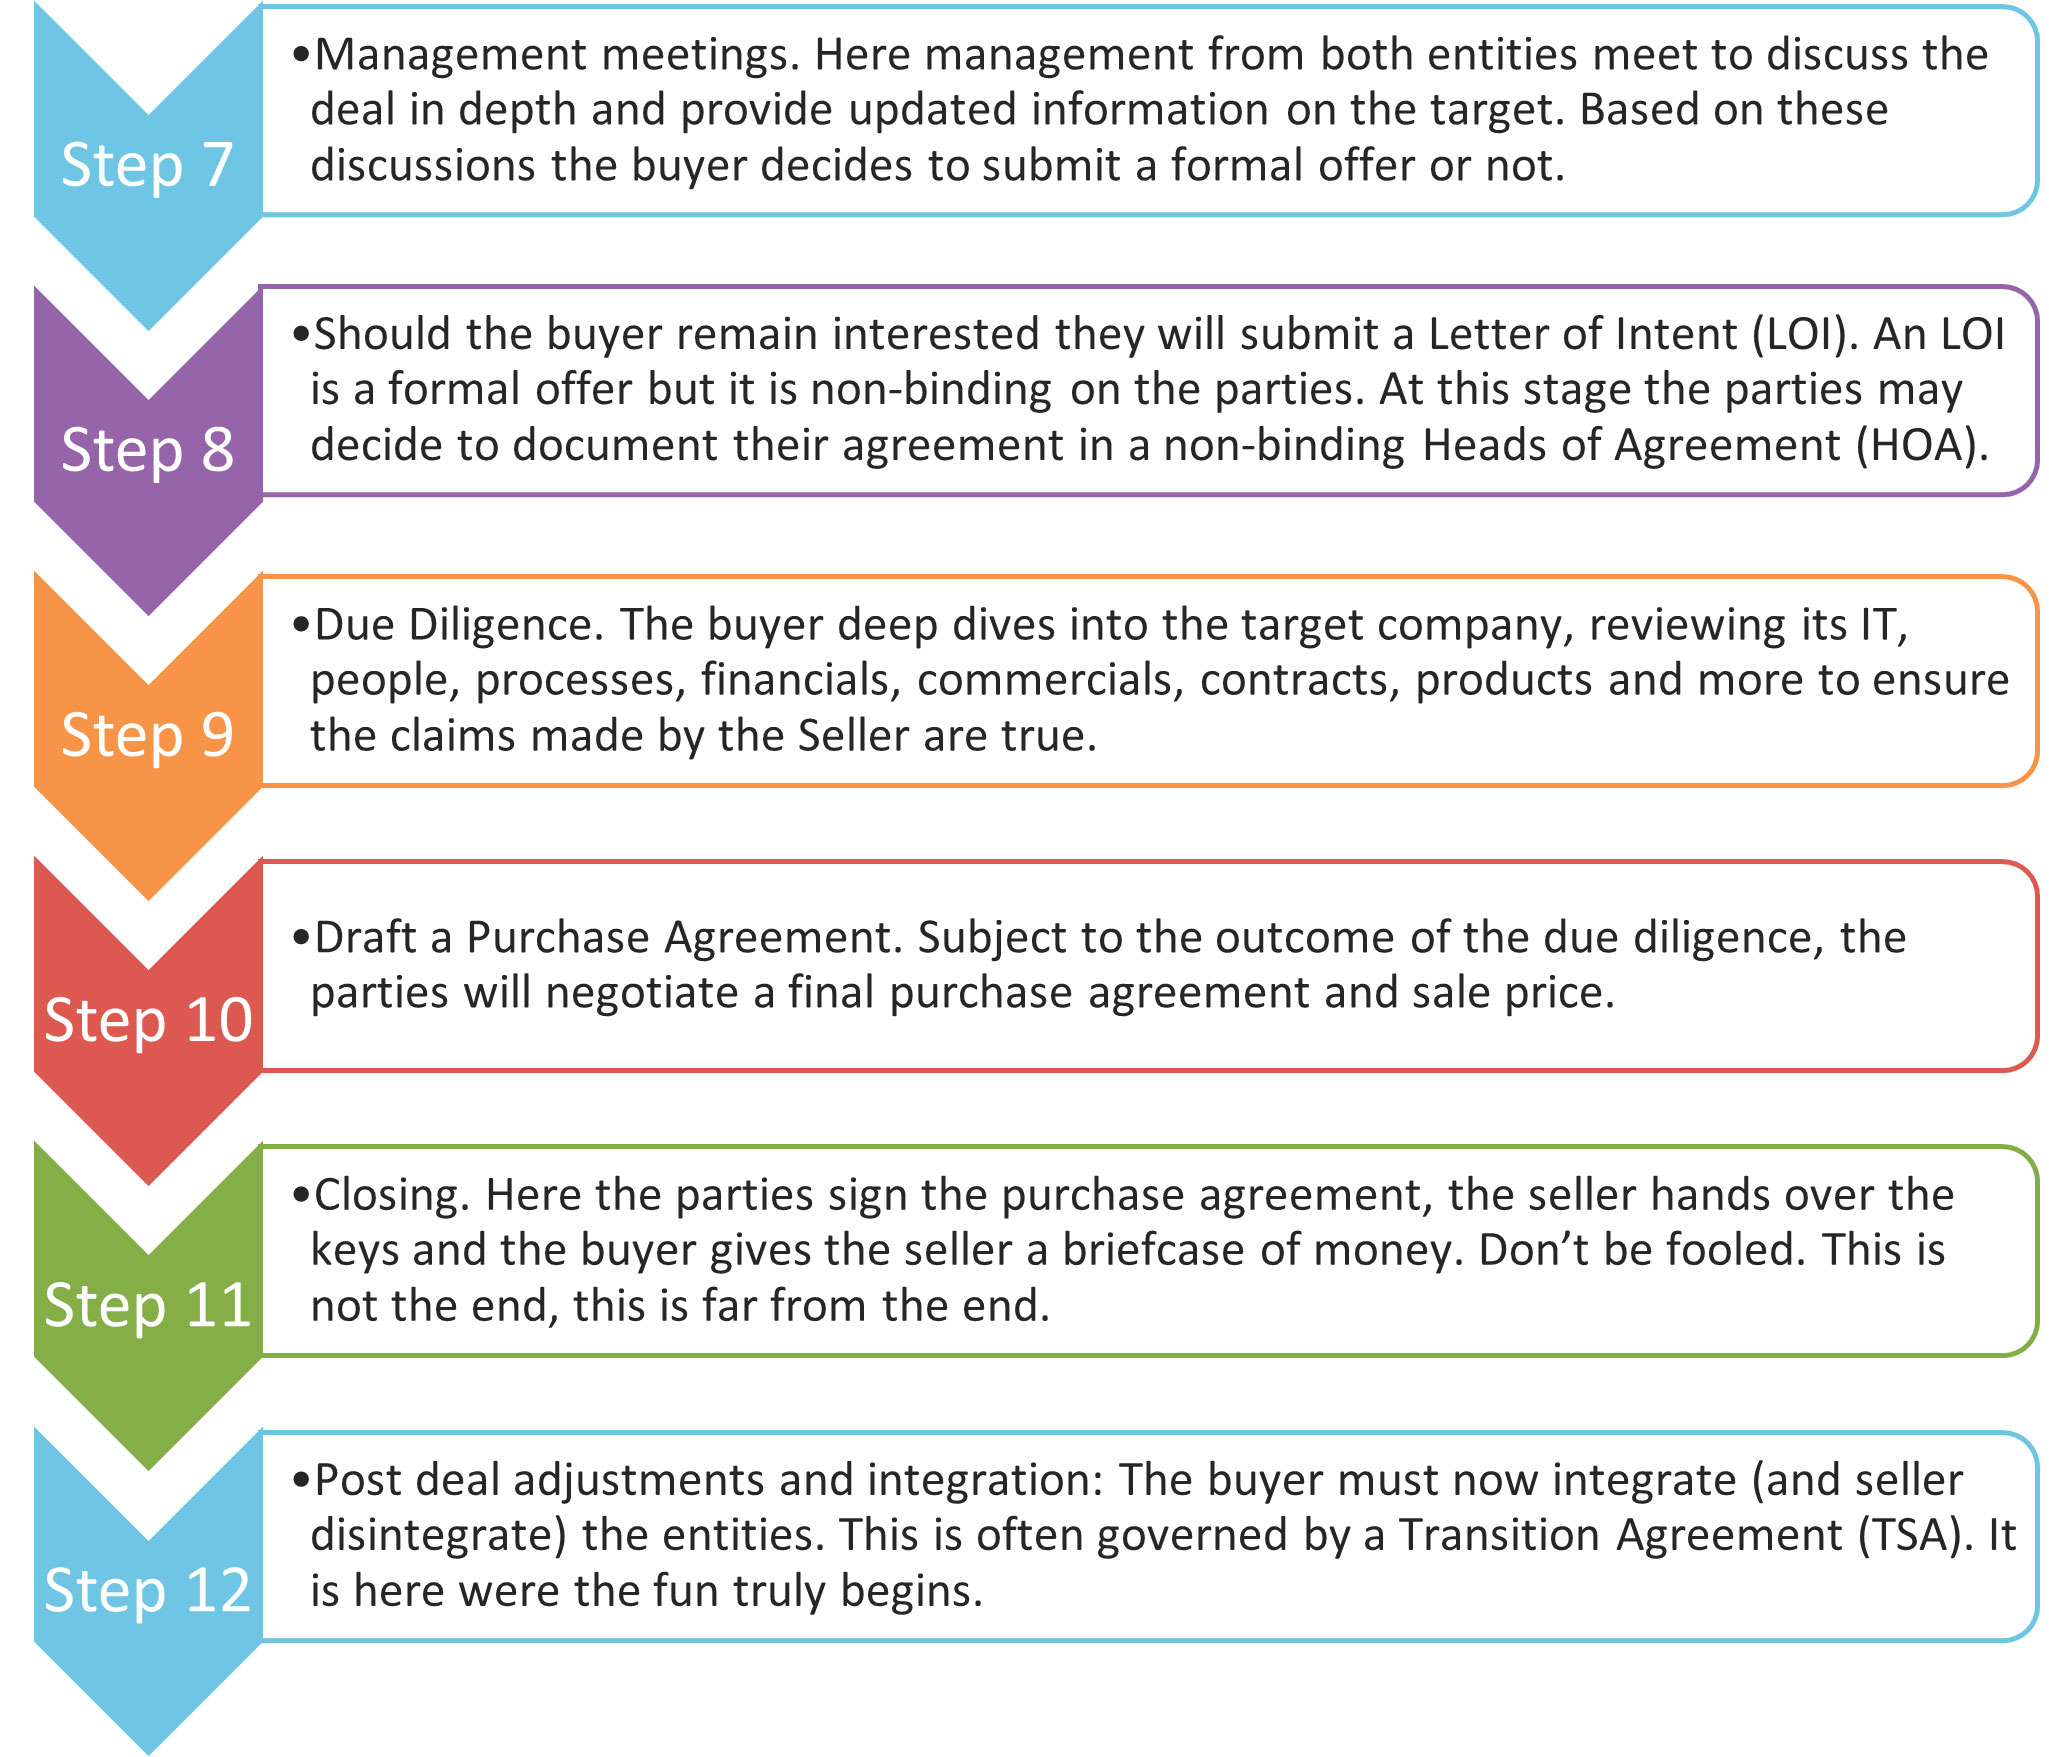 The 12 Steps of M&A